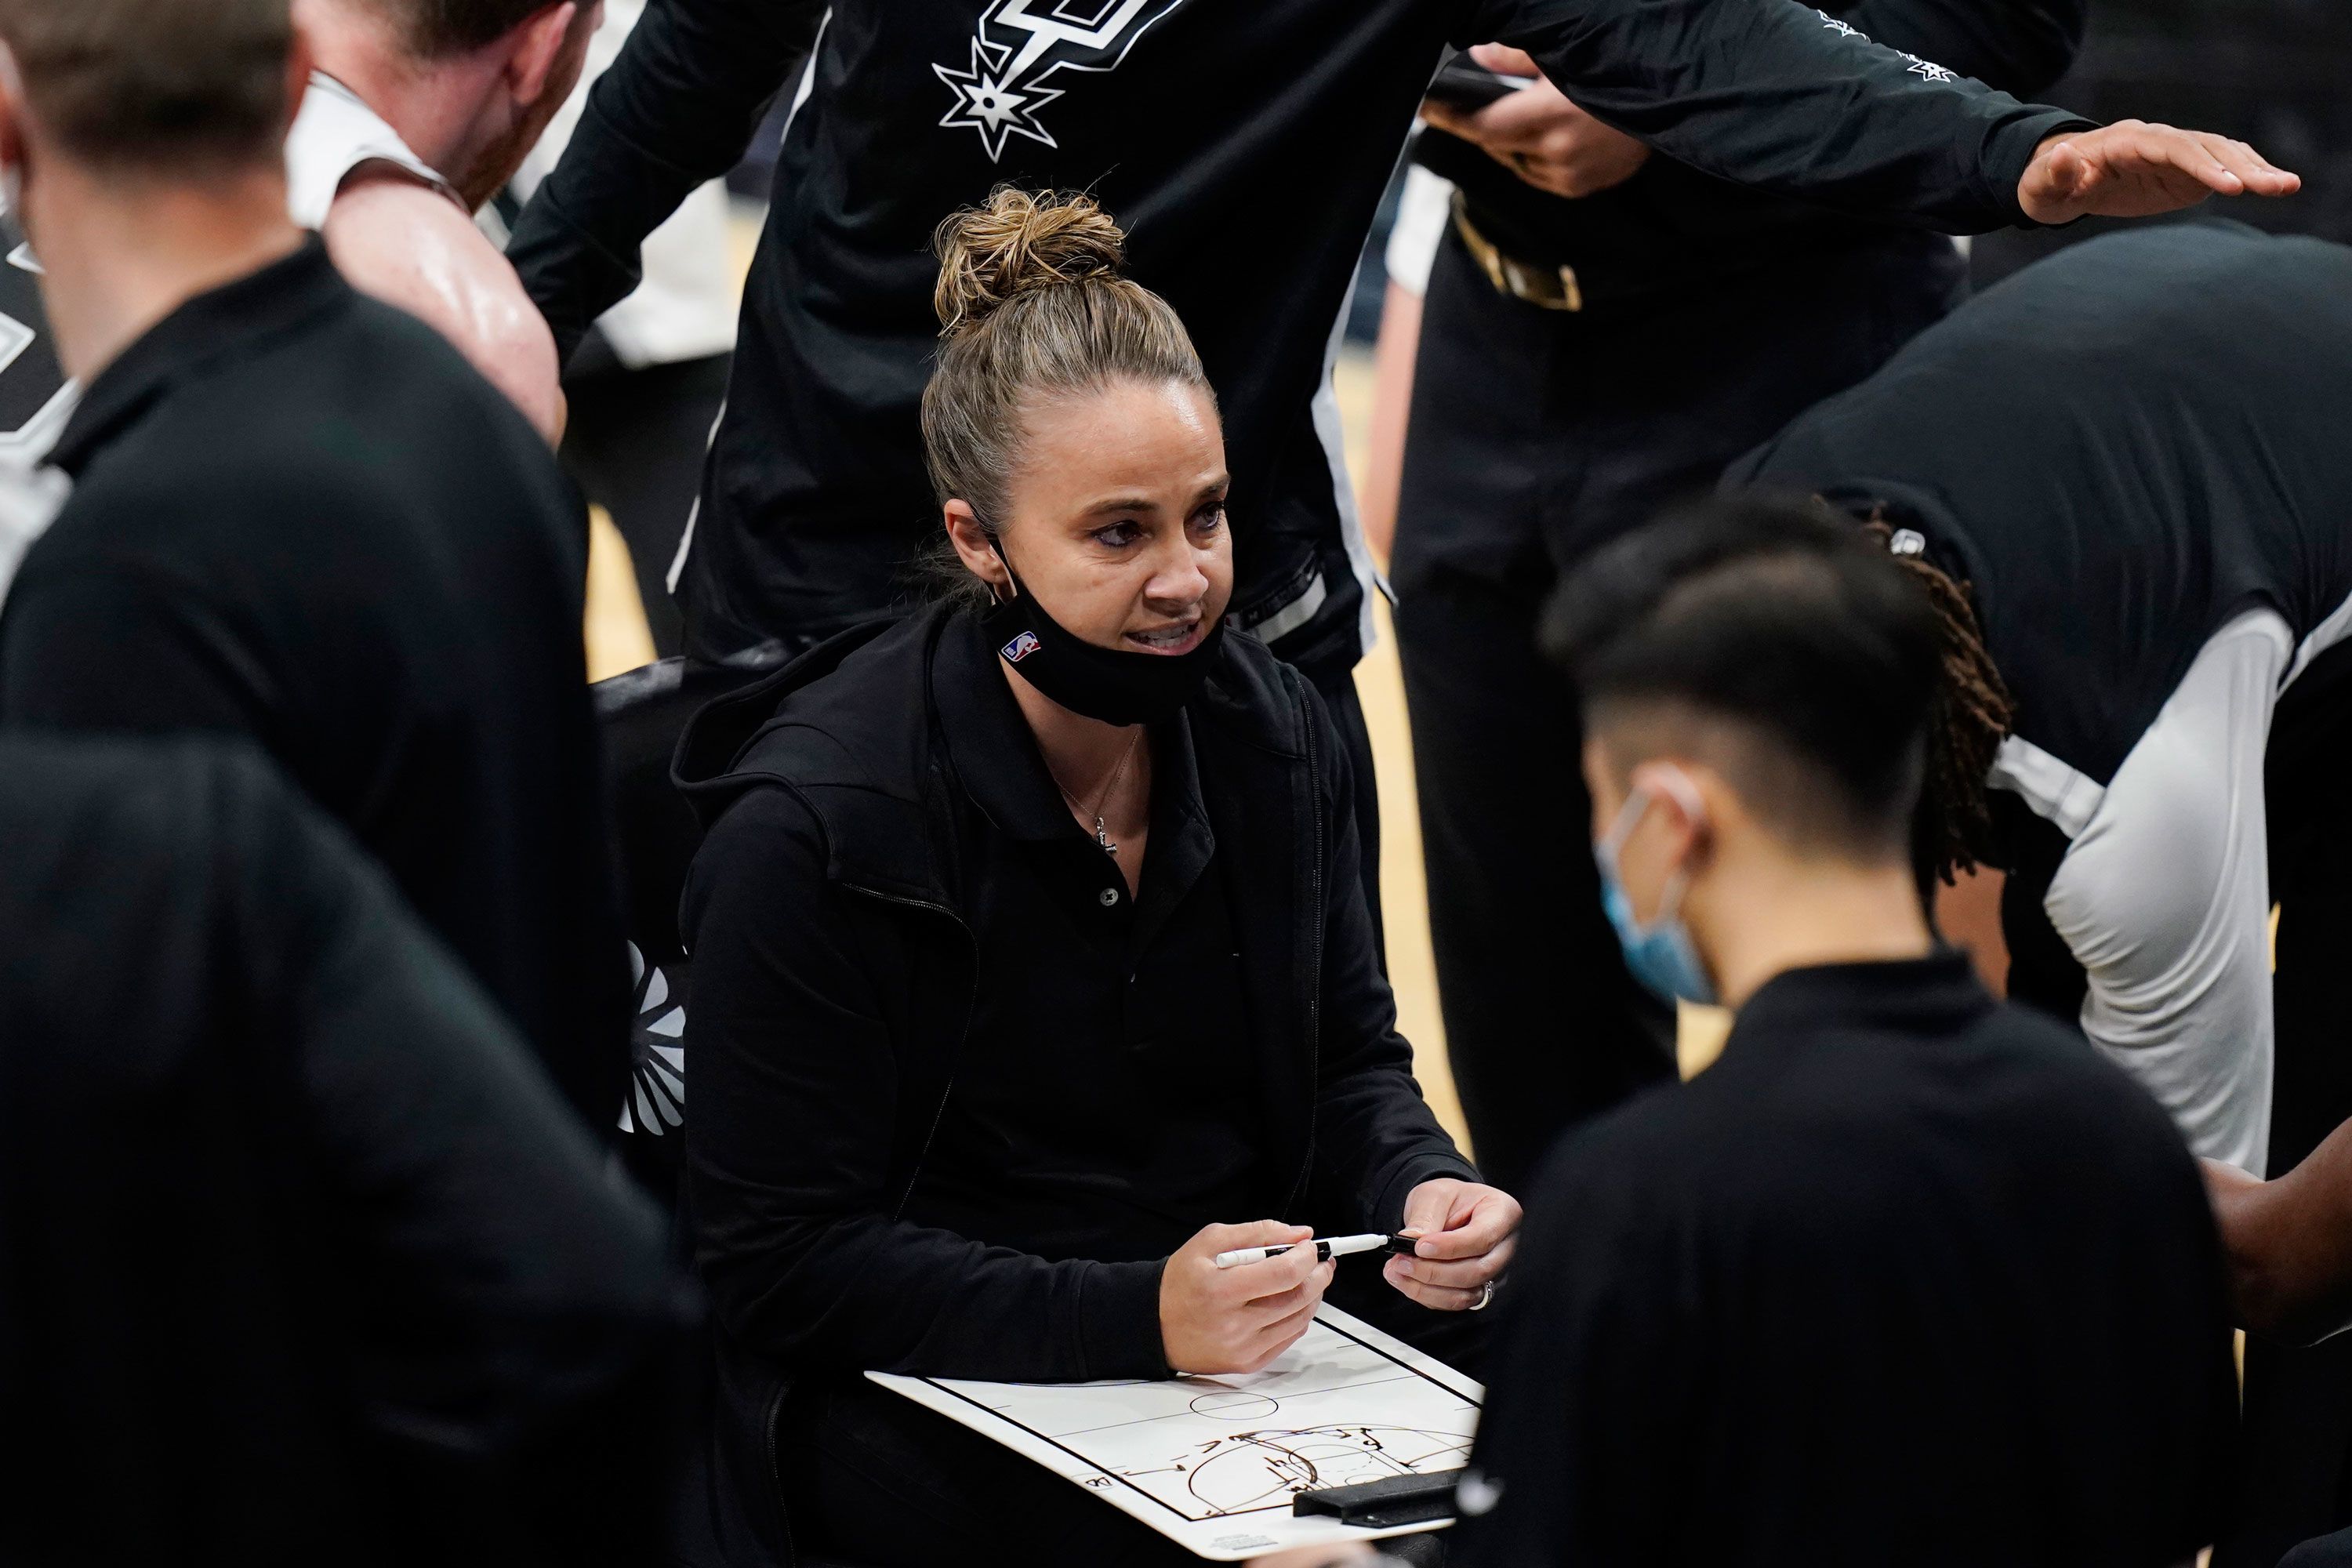 Lakers beat Spurs 121-107, Becky Hammon Becomes First Woman to Coach NBA  team – NBC Los Angeles